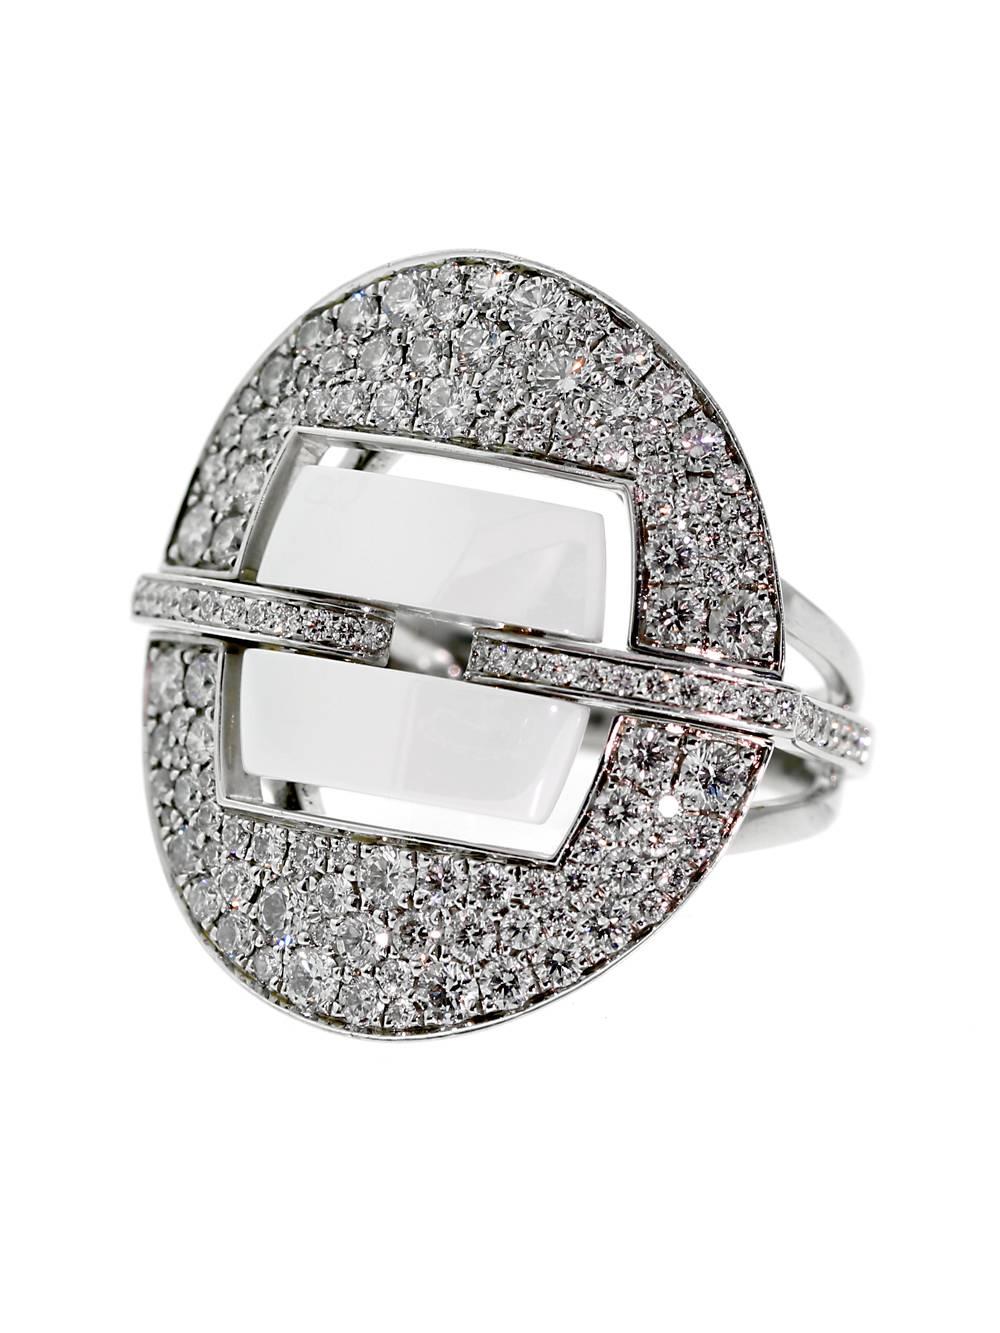 Ultra modern Chanel diamond ring showcasing a shield design adorned with round brilliant cut diamonds showcasing the high tech white ceramic center.

Chanel Retail Price: $13,500 + Tax

Size 5 1/2 ( Resizeable)